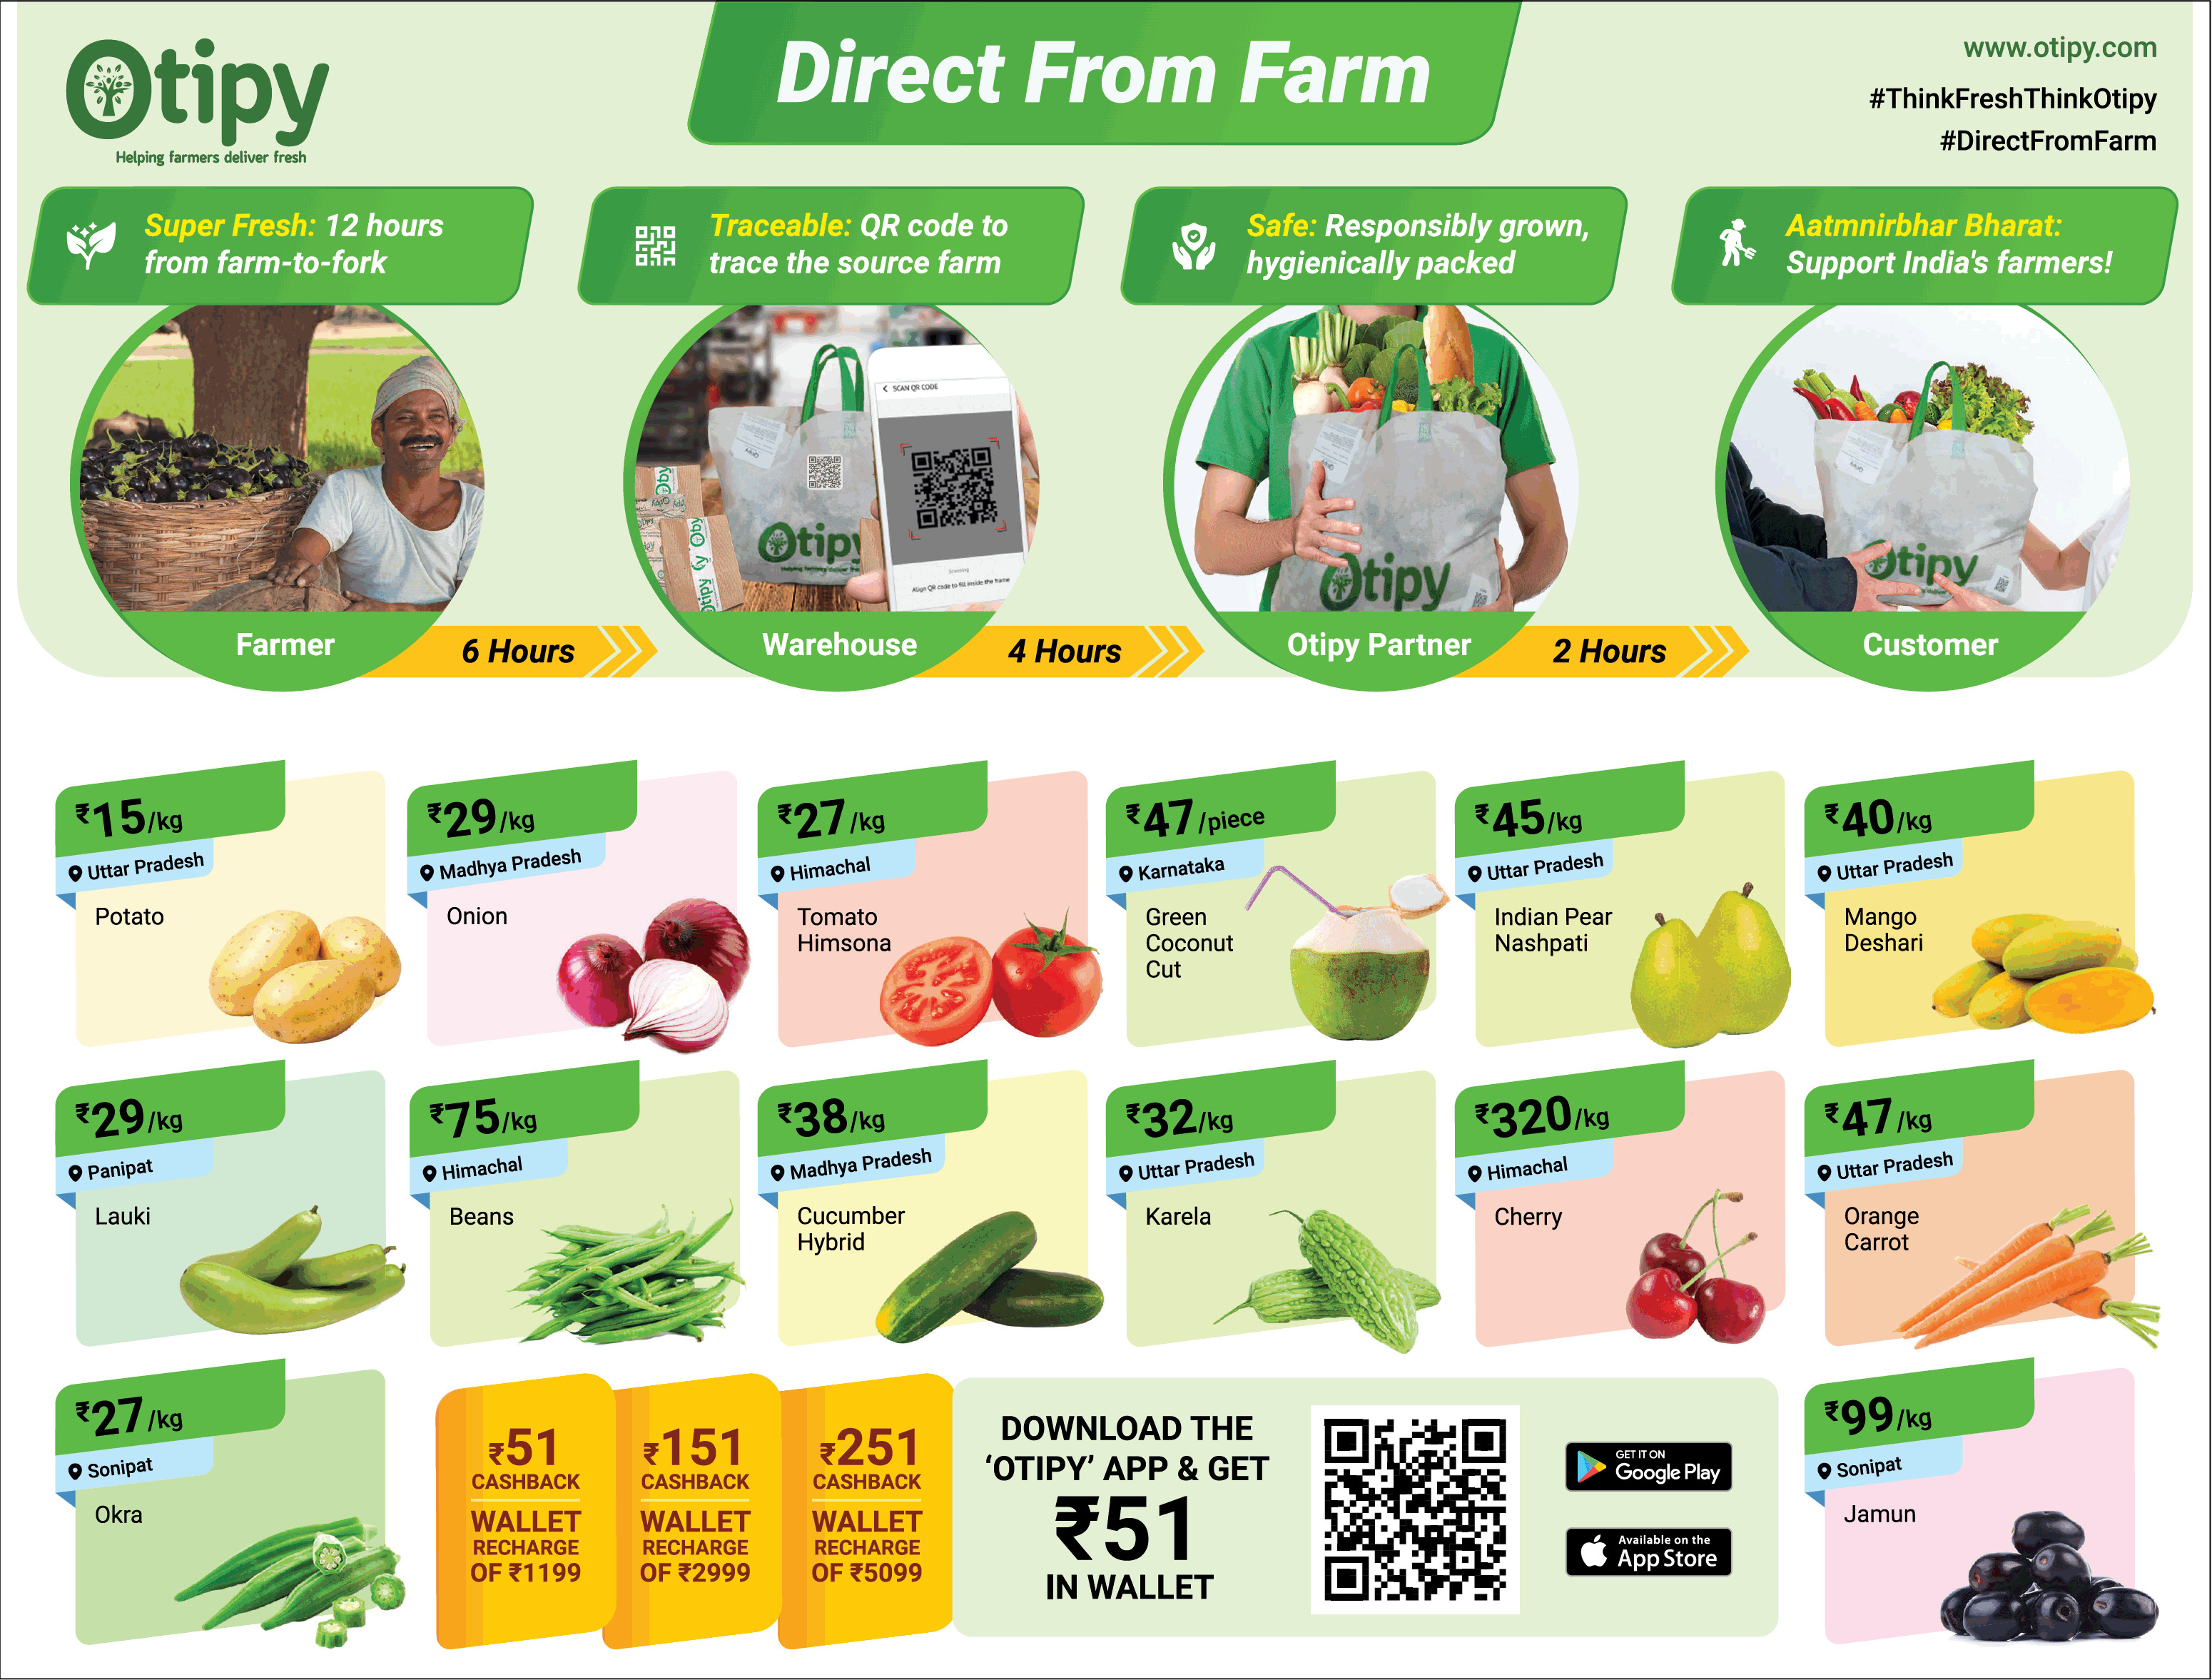 otipy-direct-from-farm-download-the-otipy-app-and-get-rs-51-in-wallet-ad-times-of-india-delhi-10-7-2021